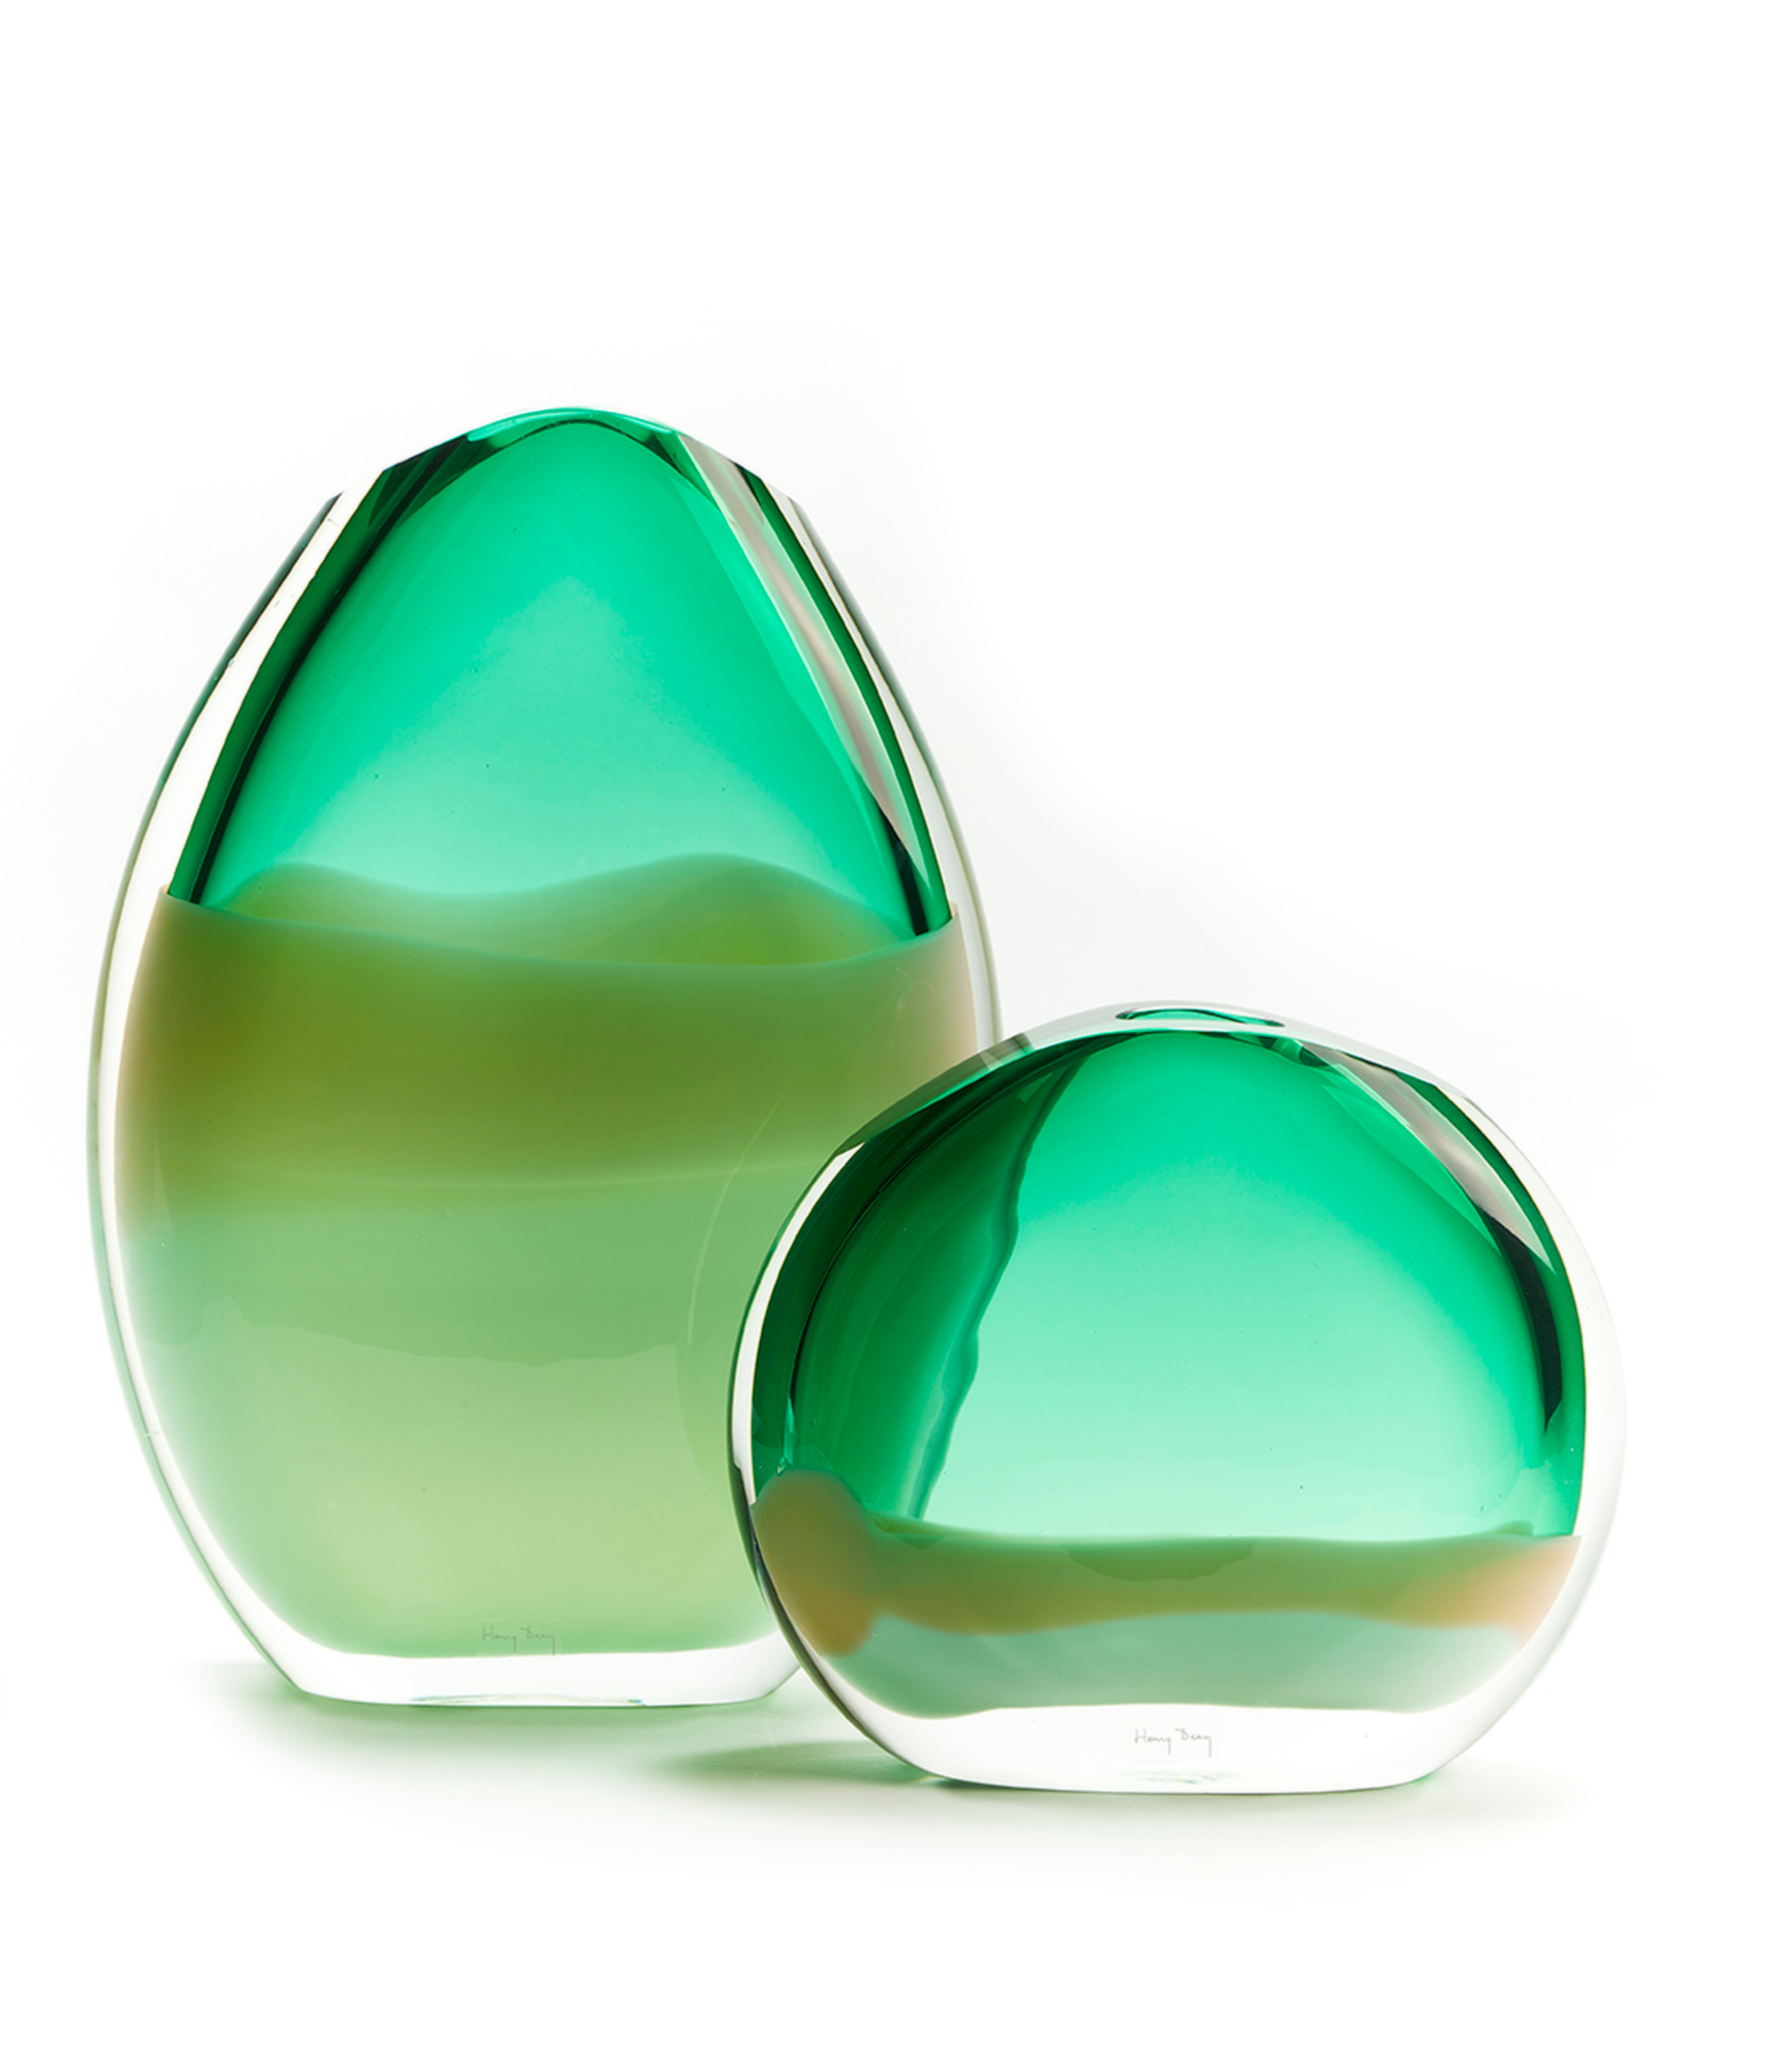 Two handmade glass objects with a oval and round shape in a green color